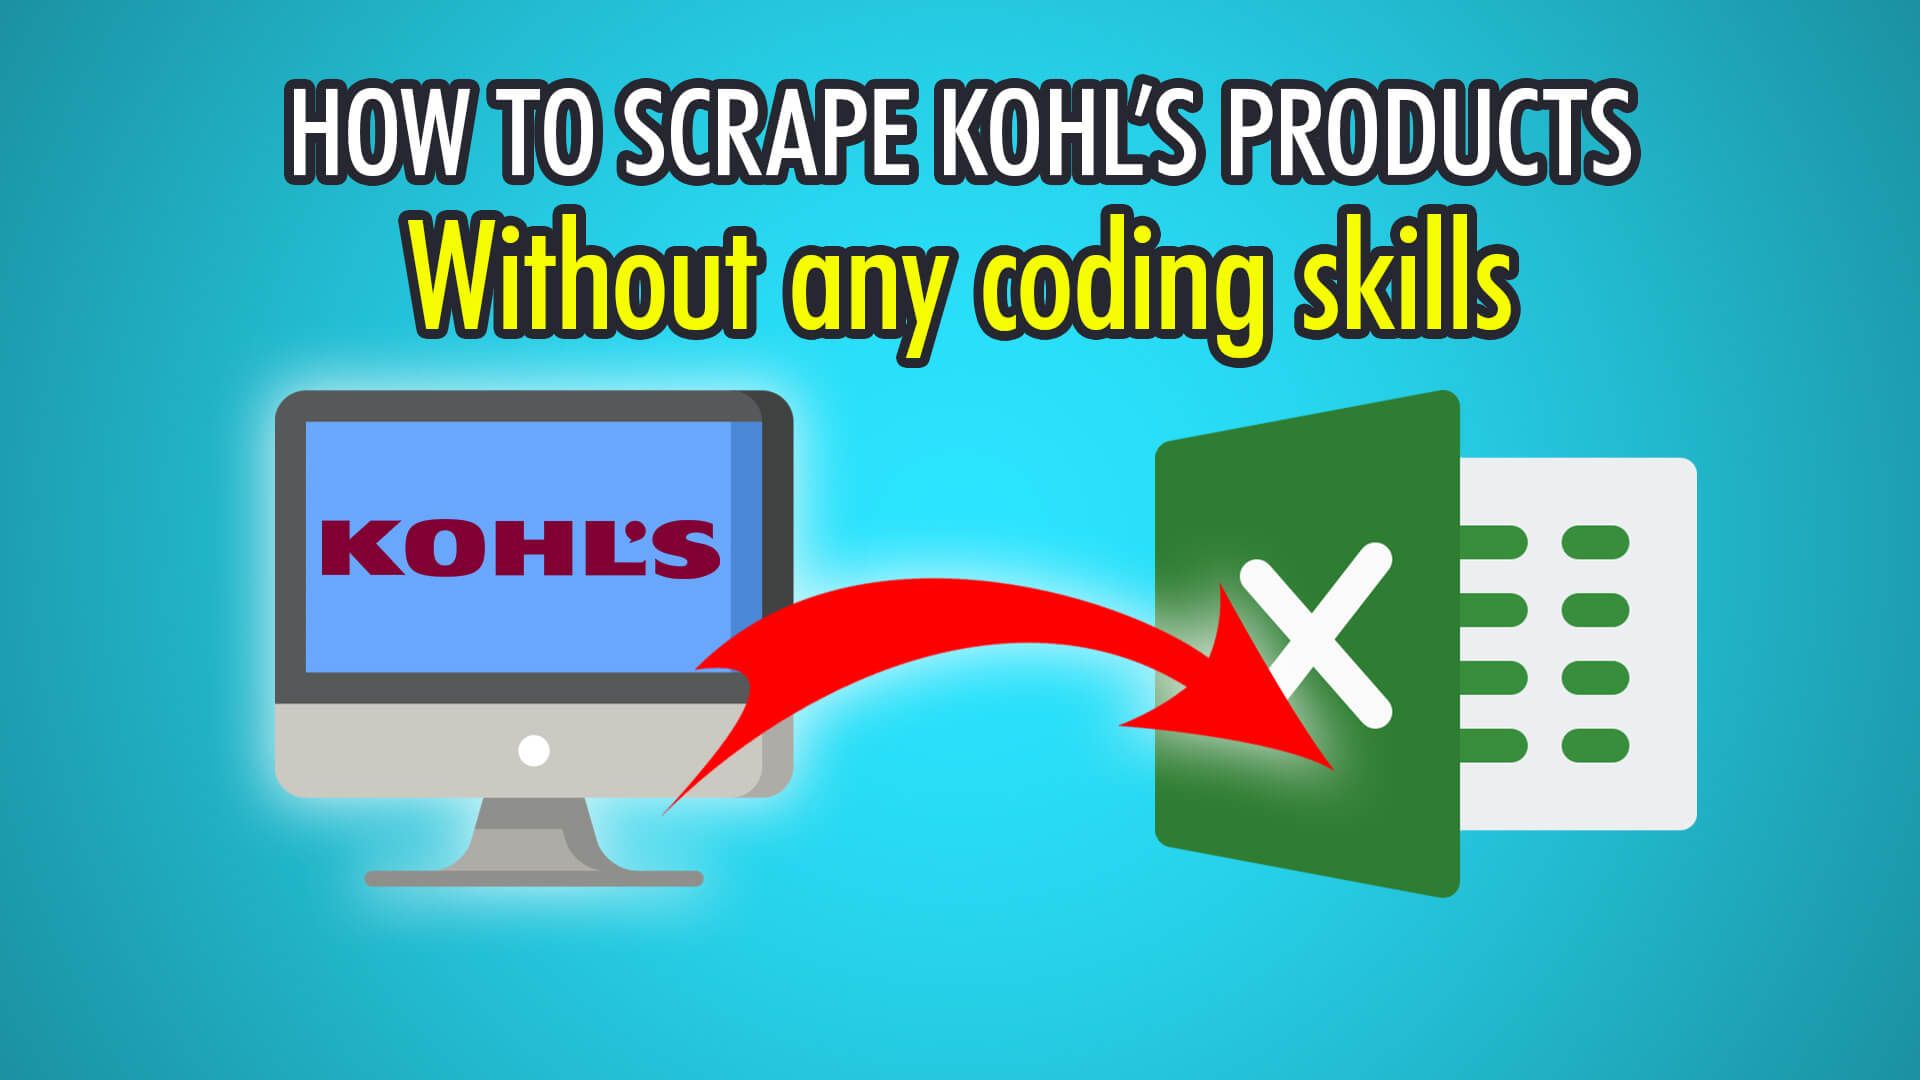 How to Scrape Kohl’s Products